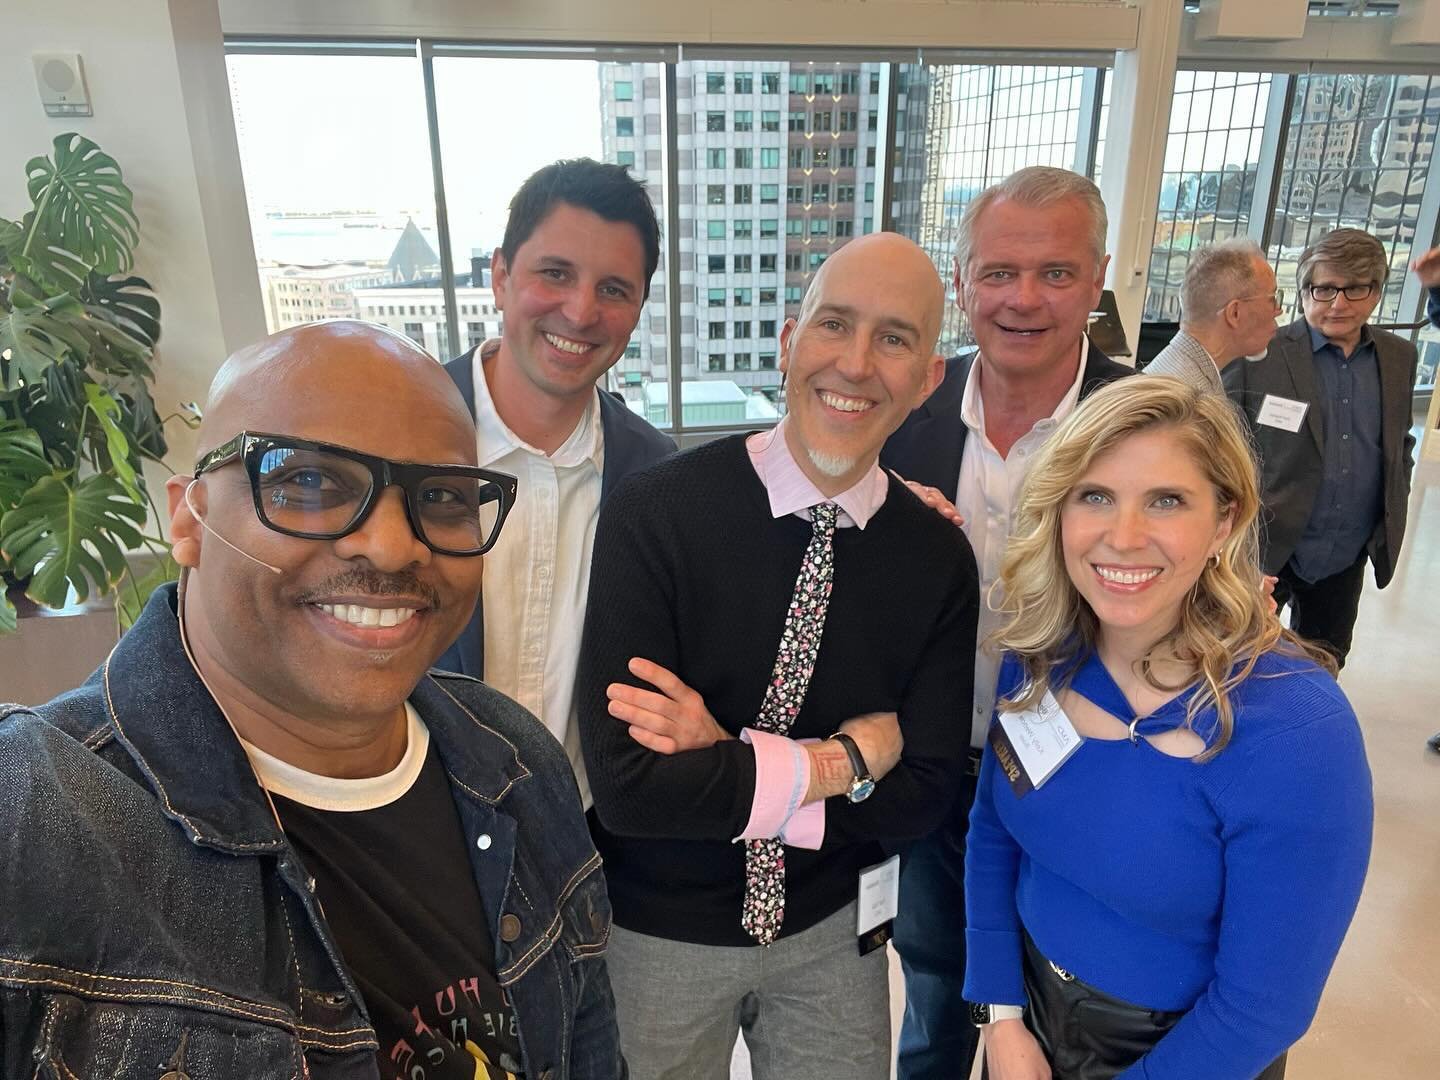 This was such a fun night! We were all challenged to #ThinkInsideTheBox 🤔💡⏱️

I&rsquo;m grateful to be included as an expert panelists alongside Ken Volk, KellyWencis and Mark J. DiTondo &mdash; moderated and orchestrated by Jonathan Markella. (The